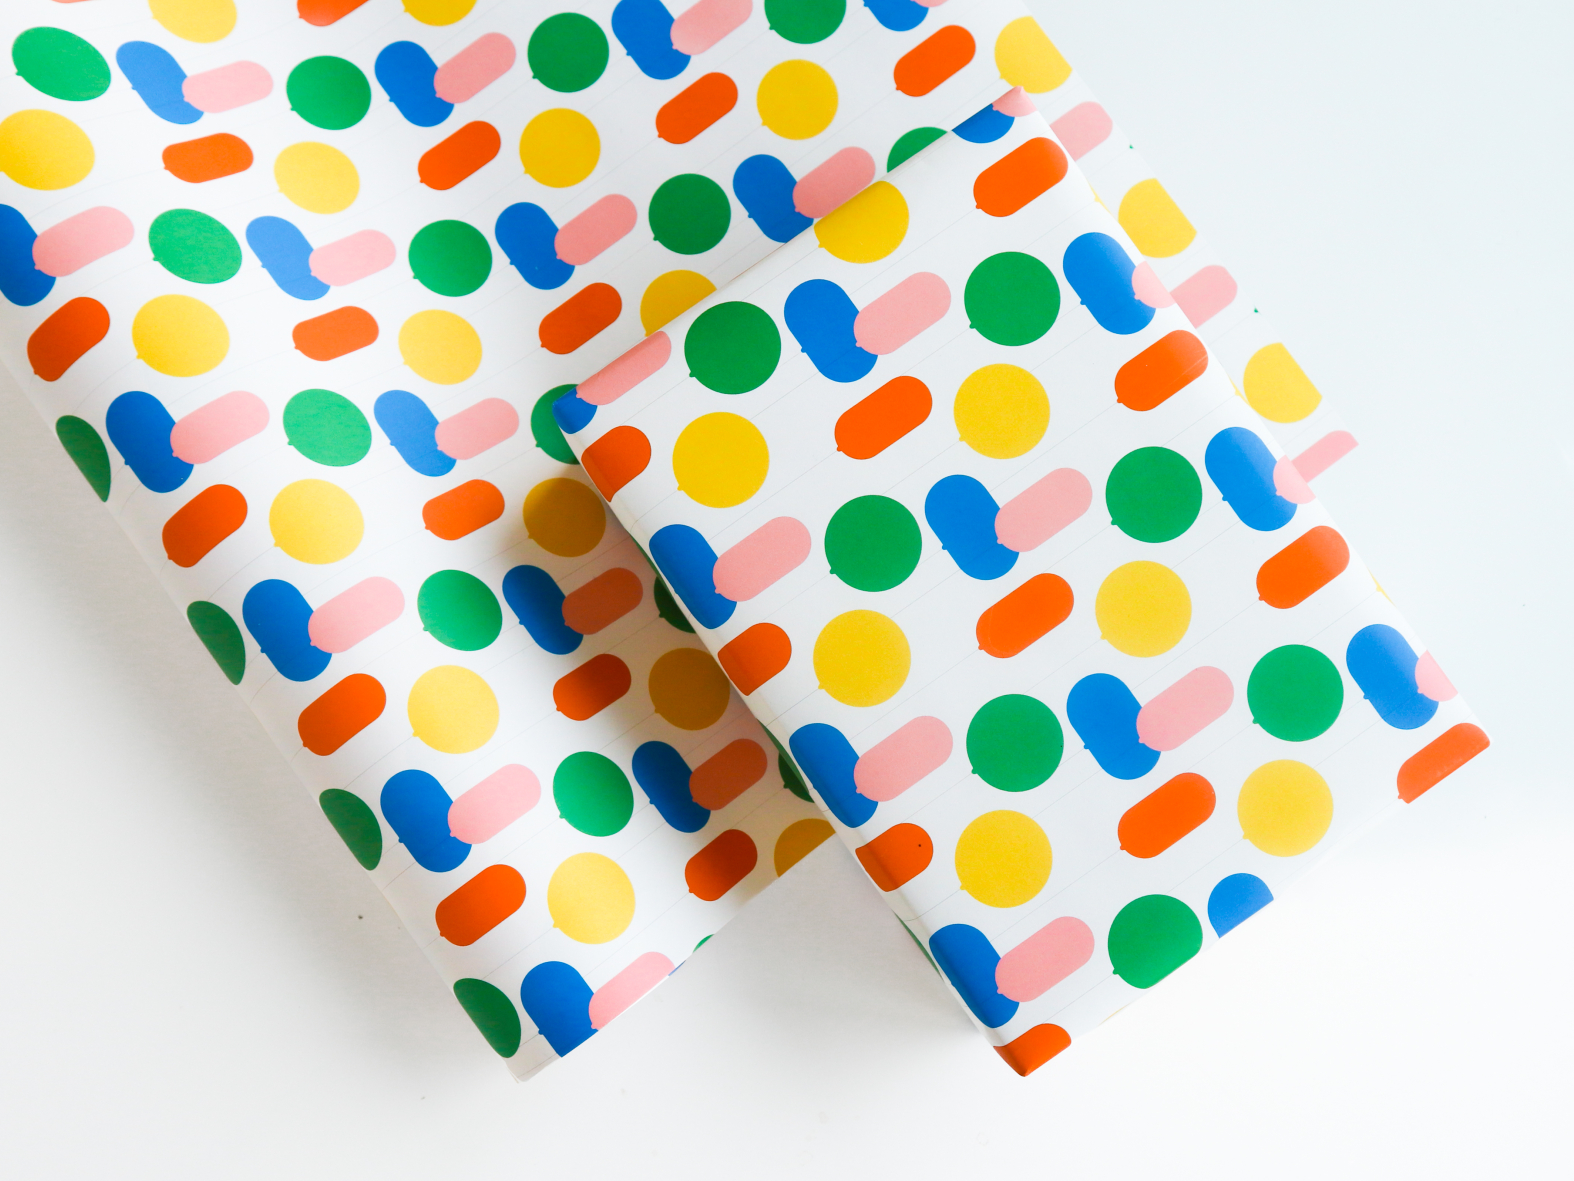 Balloon Pattern Wrapping Paper by Michele Byrne on Dribbble